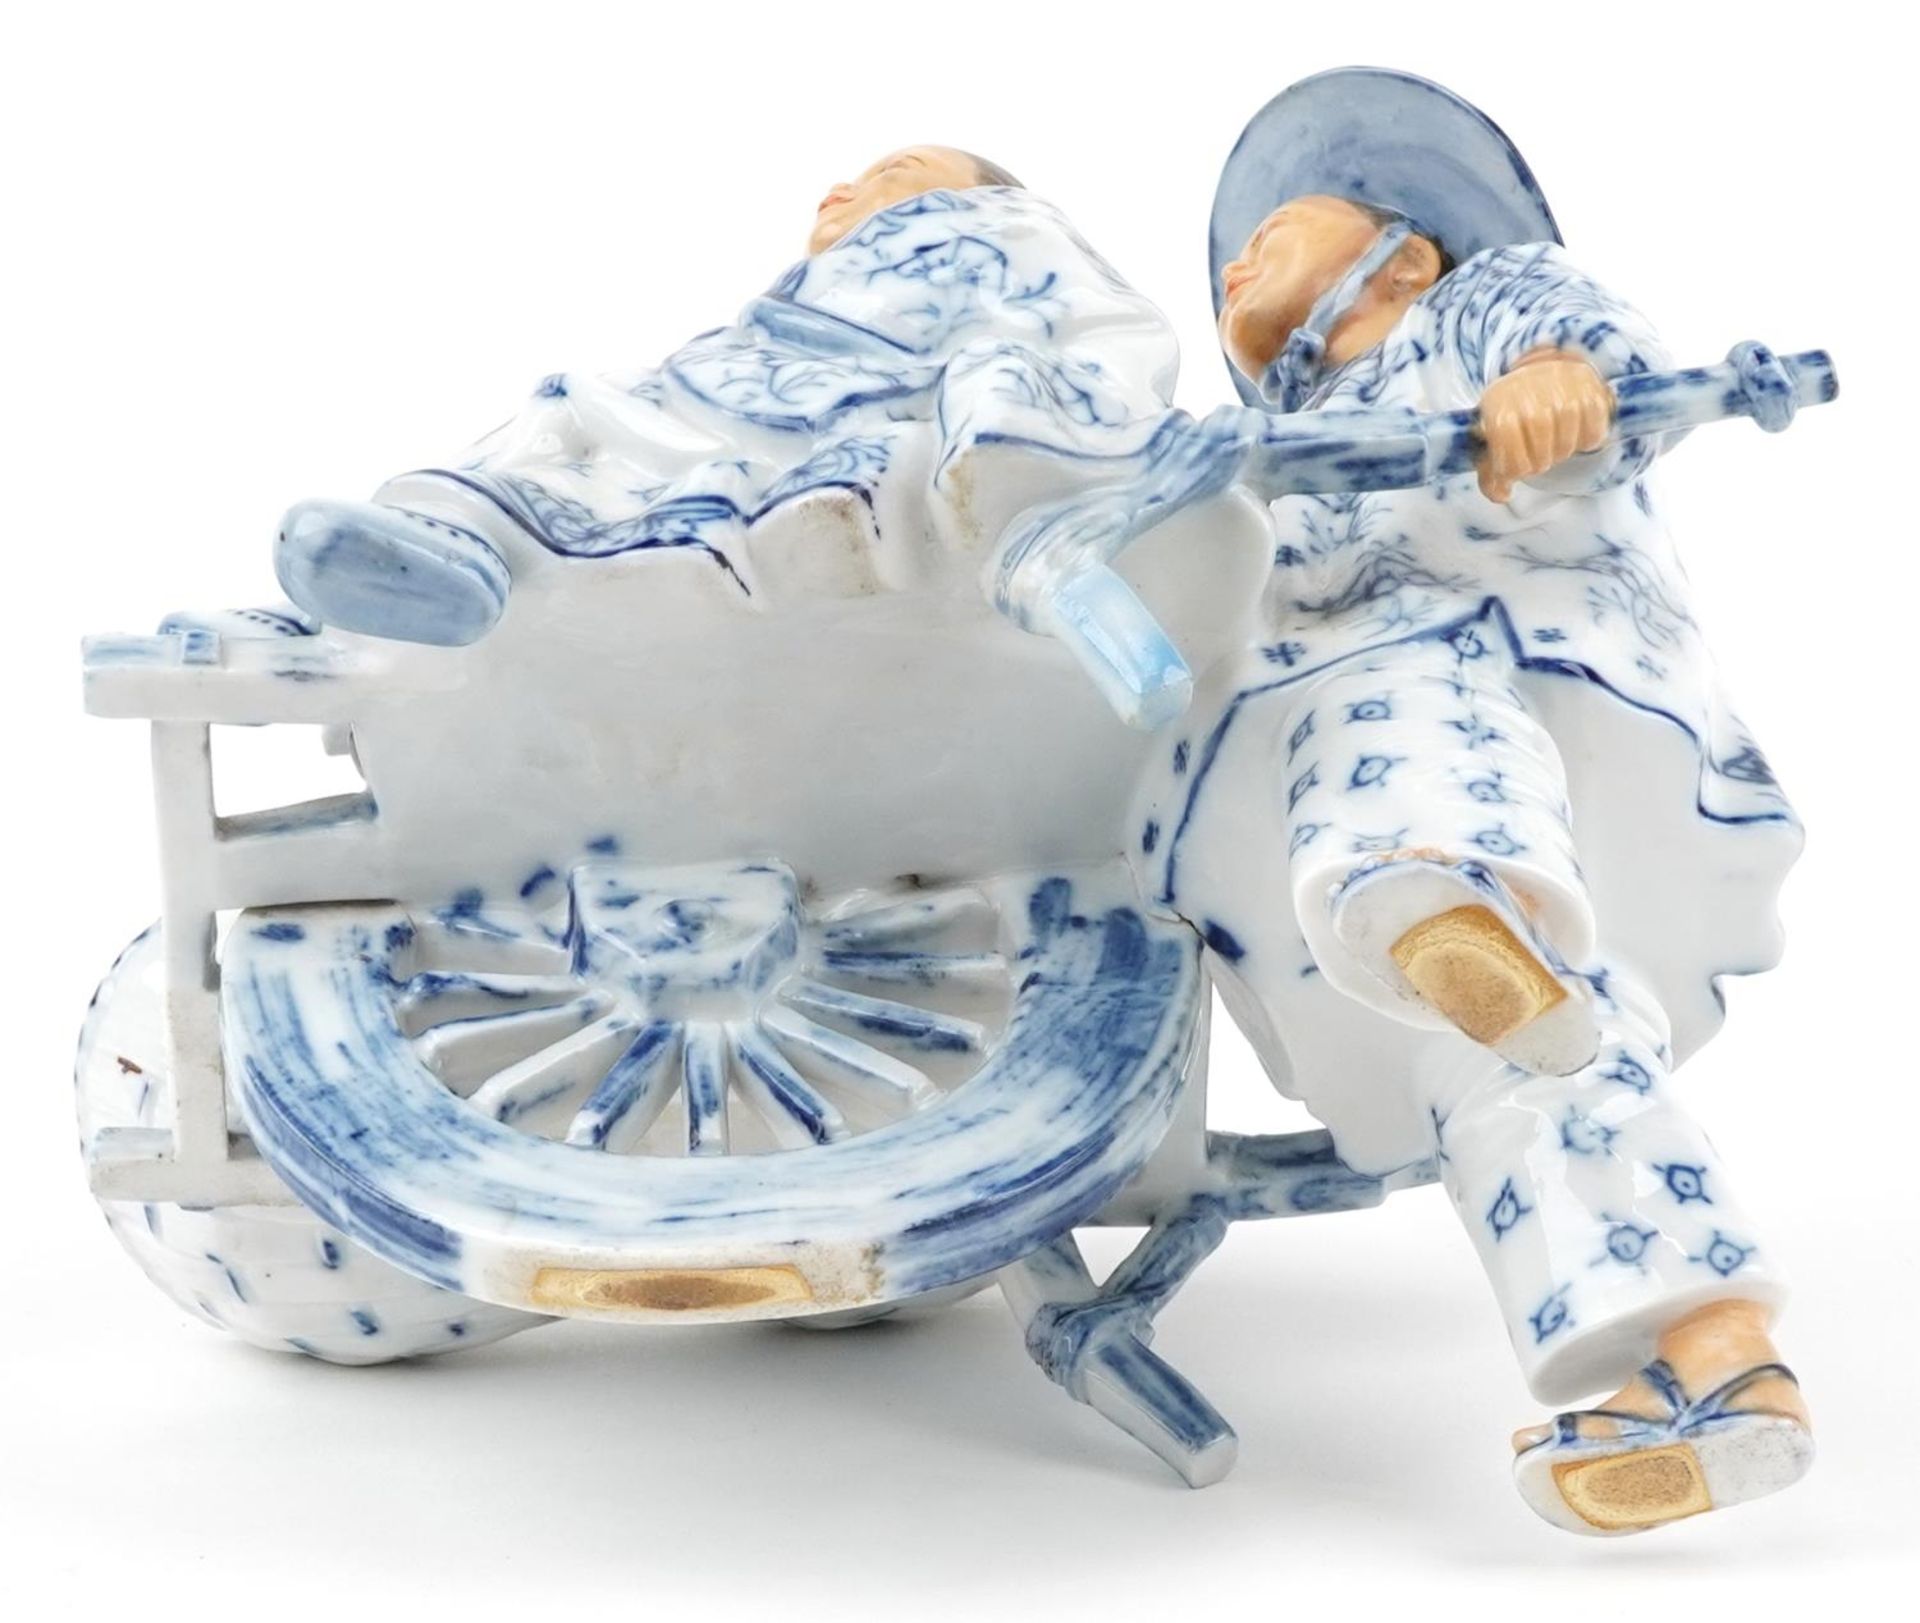 19th century European porcelain sweetmeat dish in the form of a Chinaman with rickshaw - Image 7 of 7